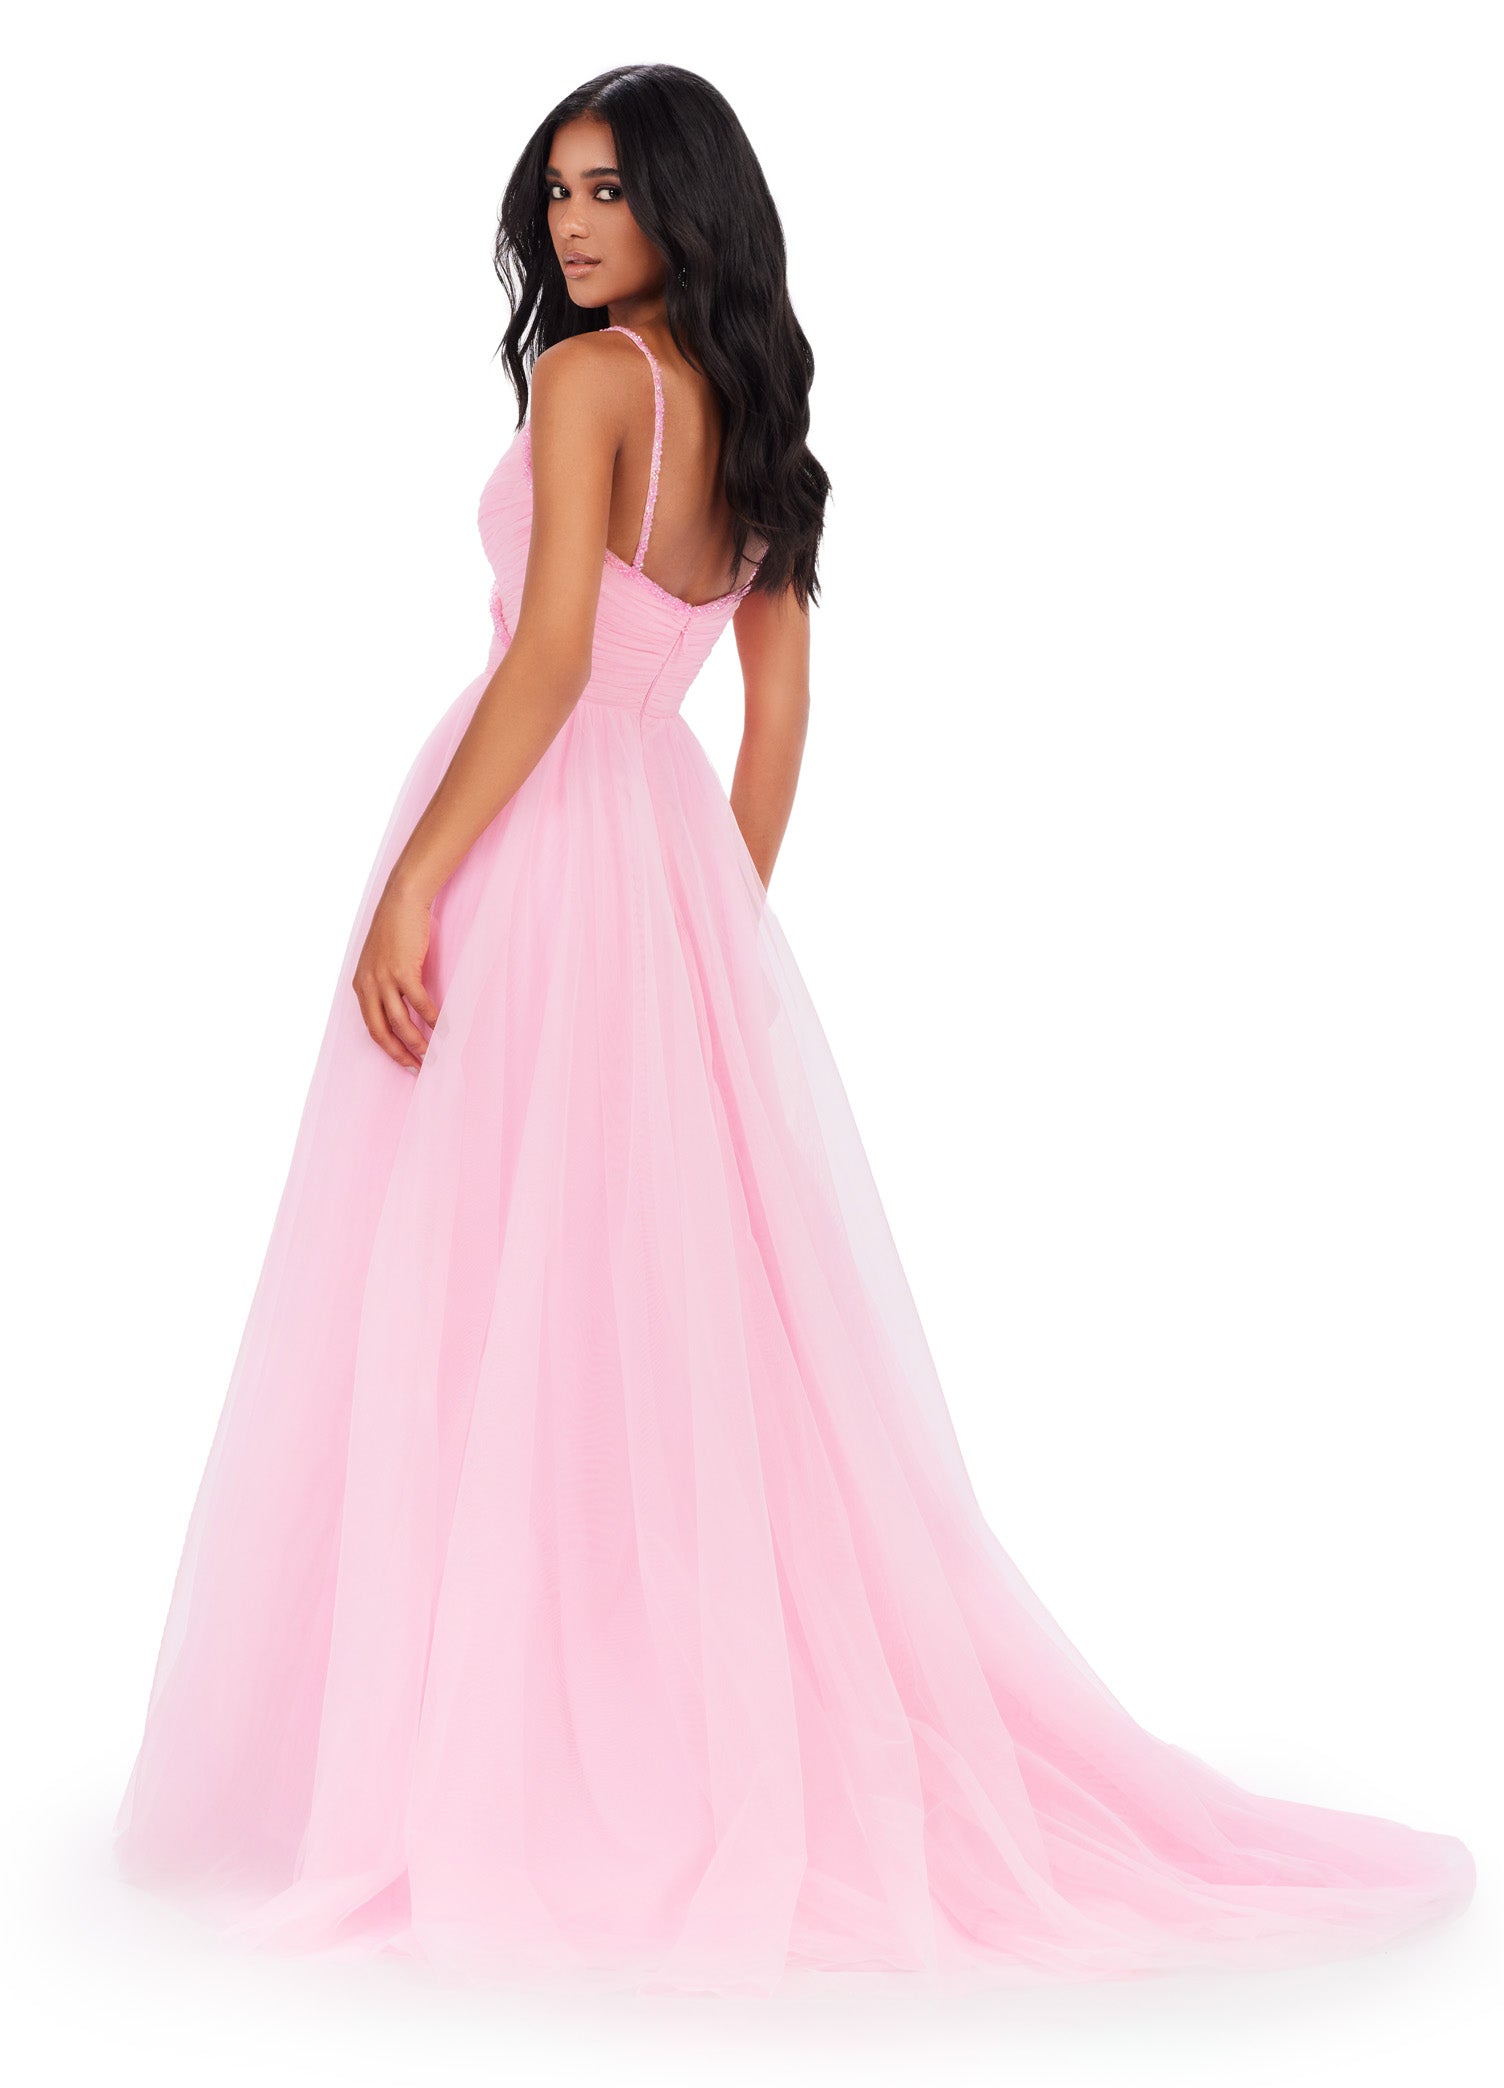 The Ashley Lauren 11461 Long Prom Dress is the perfect choice for your formal occasion. This elegant gown features delicate spaghetti straps and a tulle ball gown skirt for a timeless look. The intricate beaded detailing adds a touch of sparkle, making you stand out from the crowd. Experience the ultimate in luxury with this pageant-worthy dress. This simplistic ball gown features dainty beaded spaghetti straps with a ruched bodice.